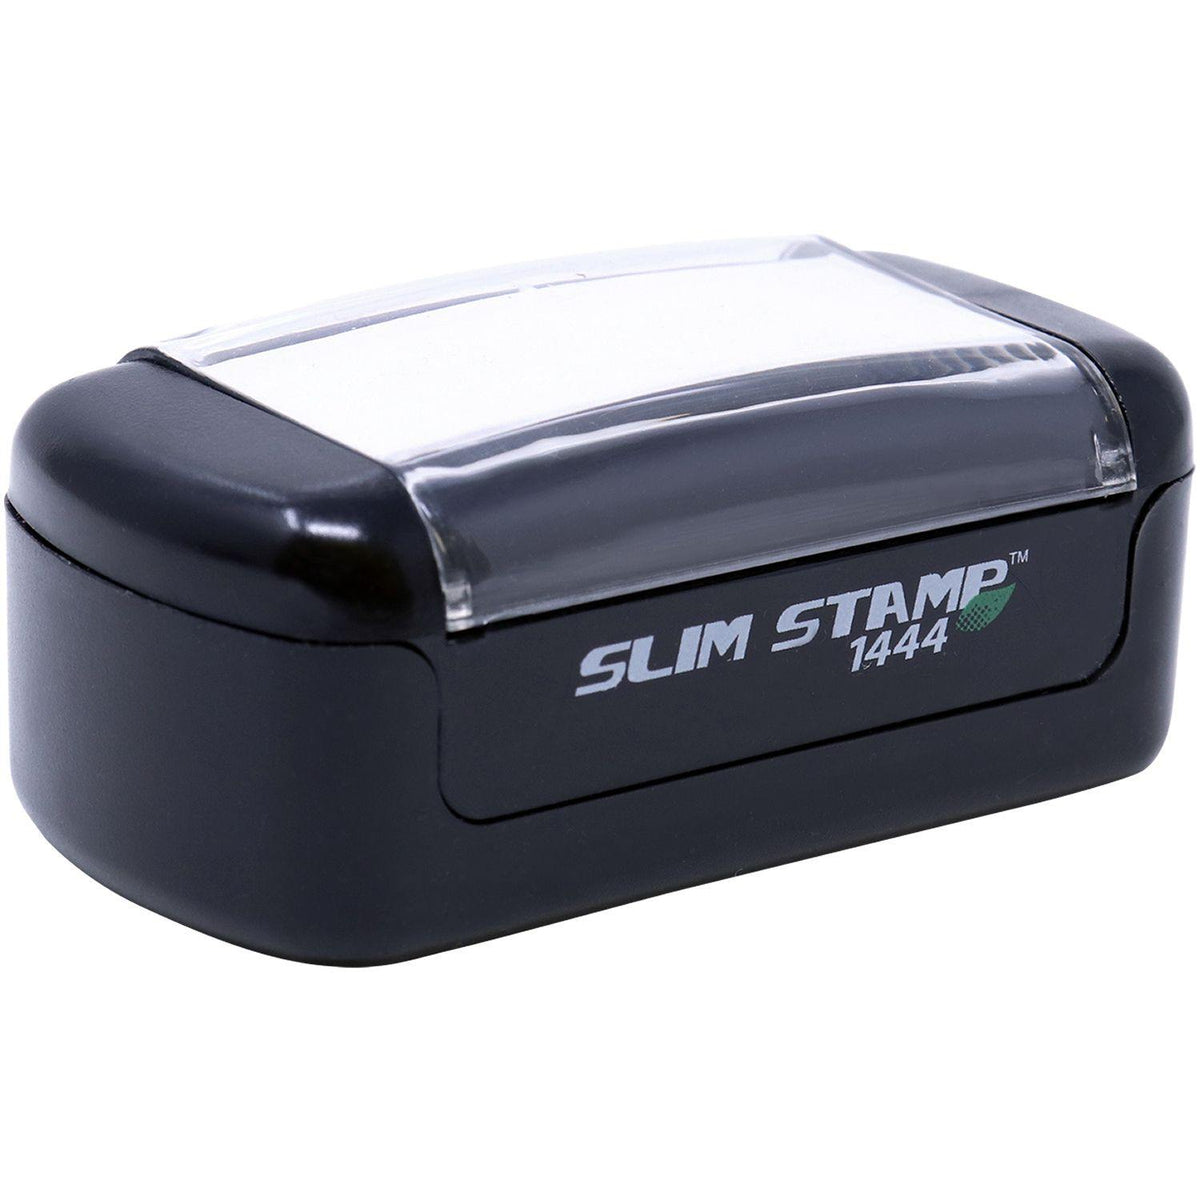 Slim Pre-Inked Bold Rough Draft Stamp - Engineer Seal Stamps - Brand_Slim, Impression Size_Small, Stamp Type_Pre-Inked Stamp, Type of Use_General, Type of Use_Office